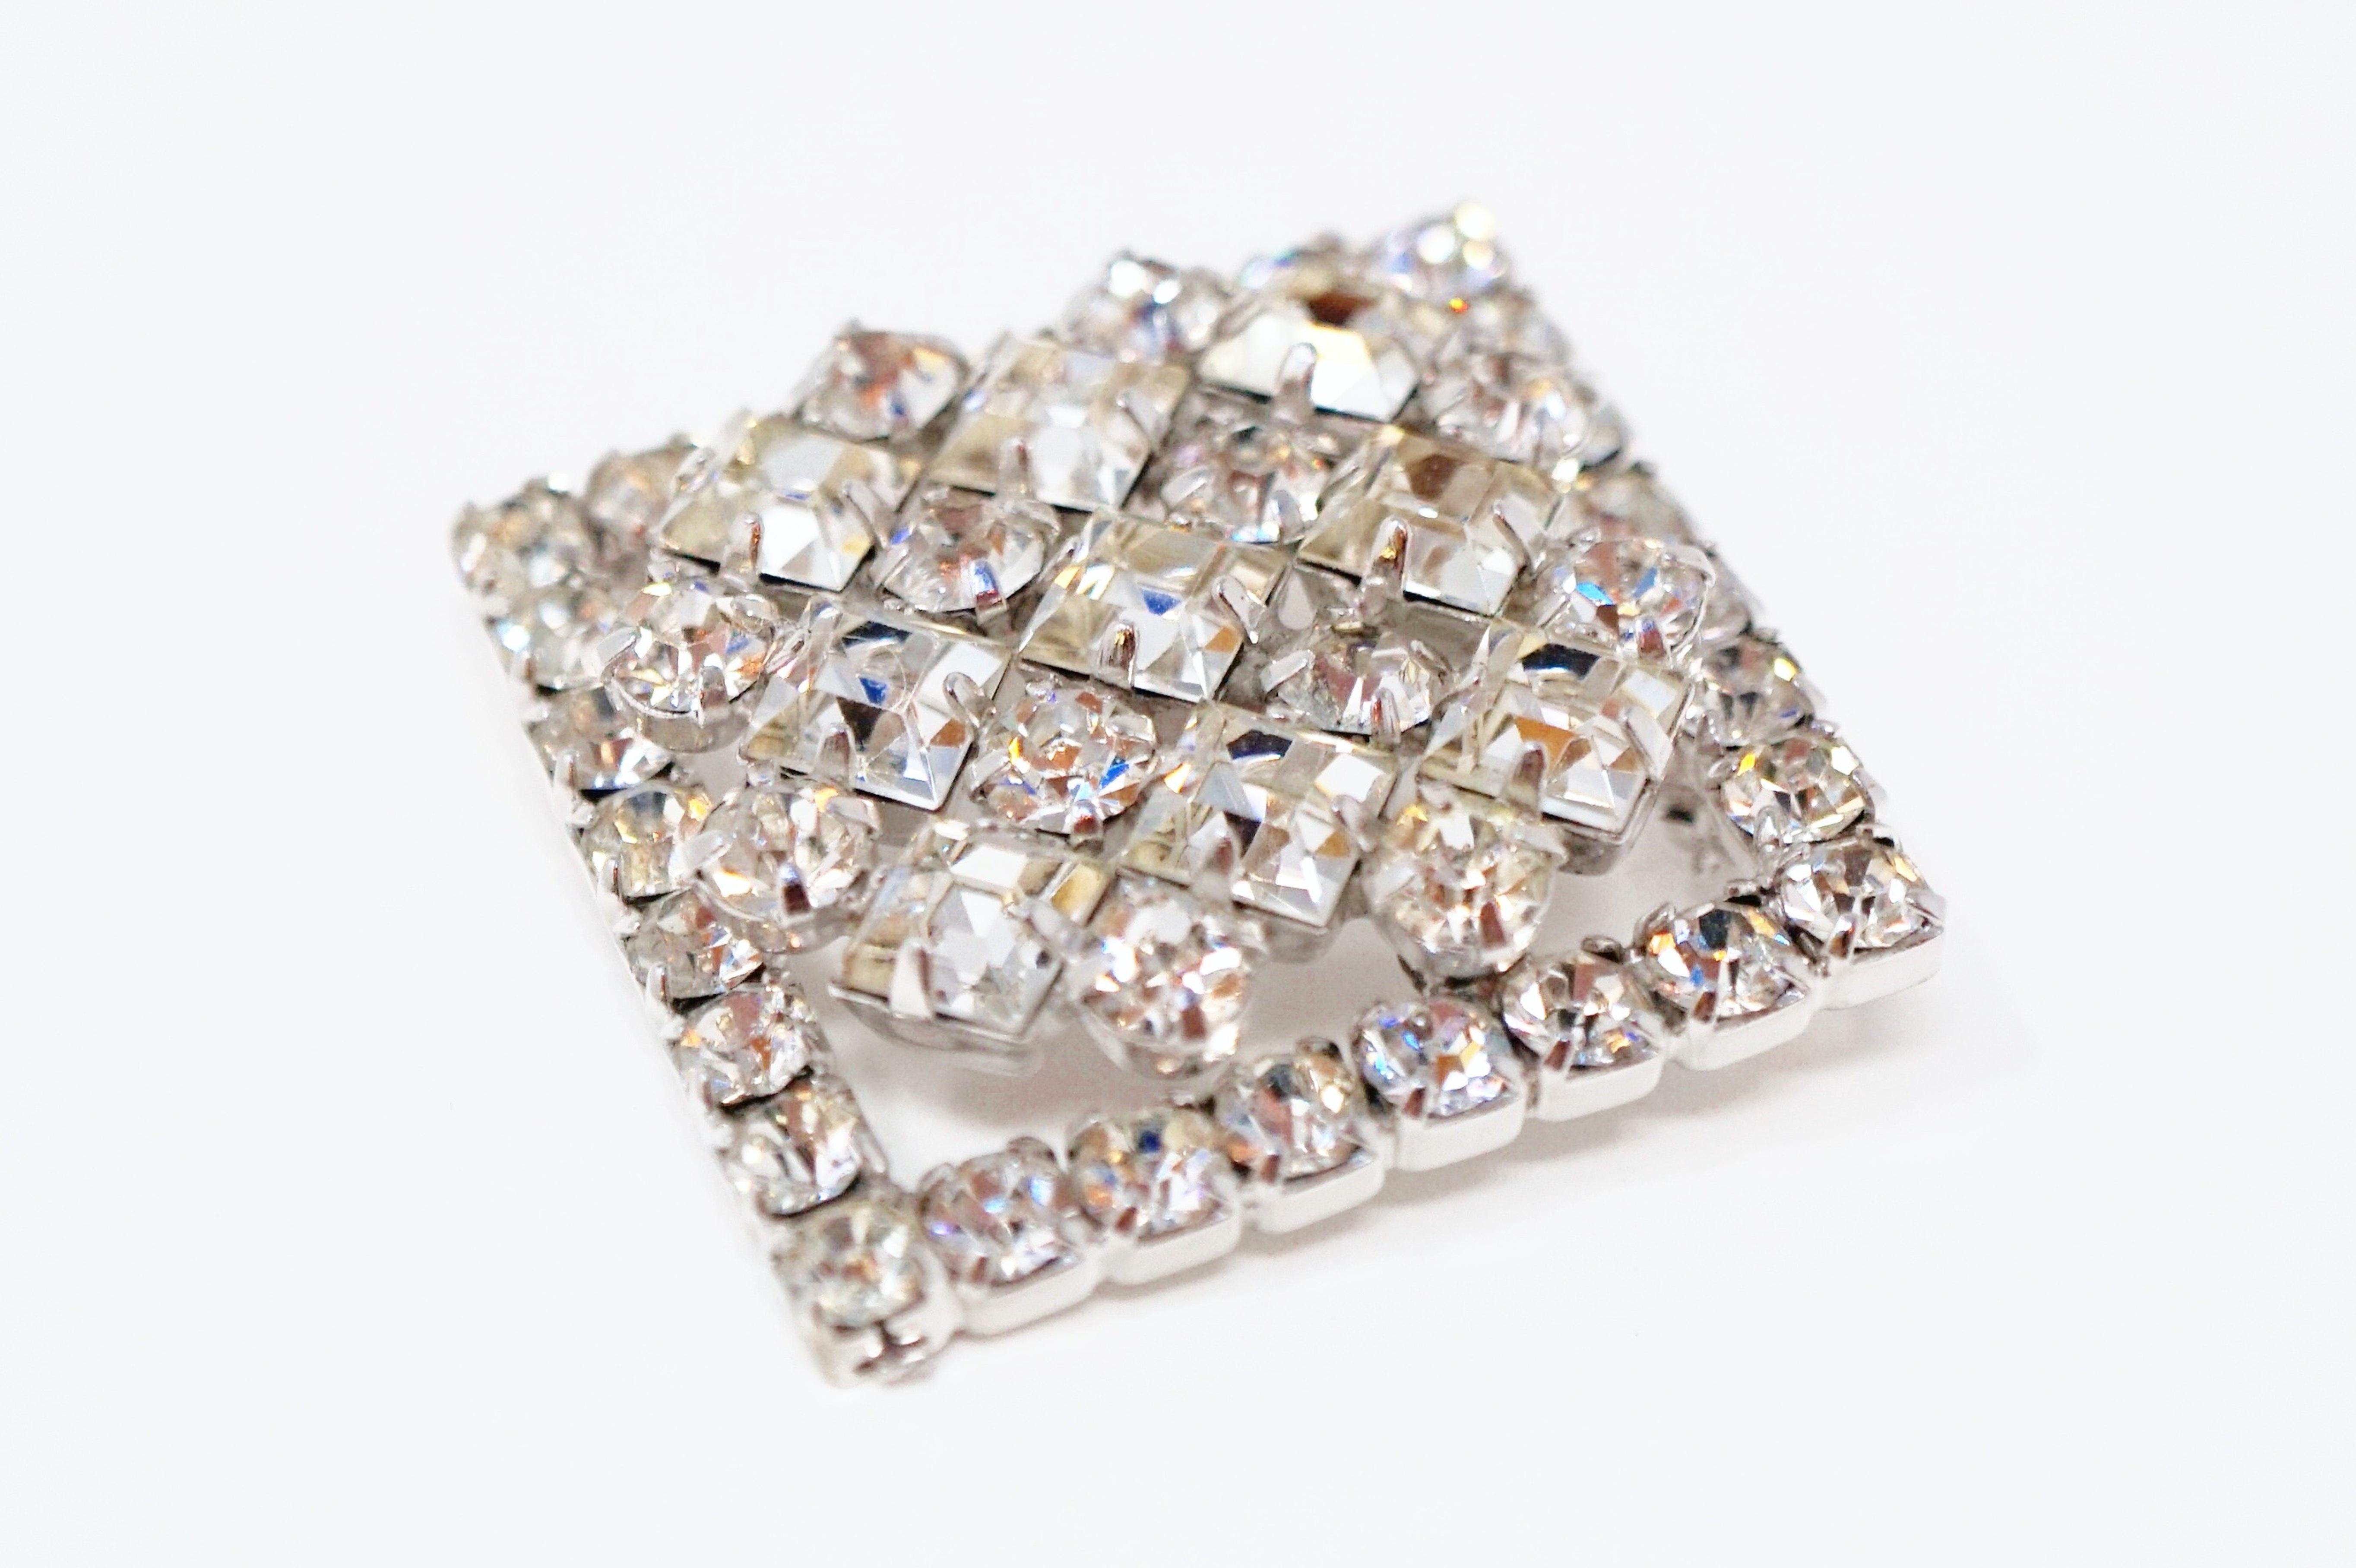 Vintage Faceted Crystal Rhinestone Brooch by Weiss, Signed, circa 1952 2